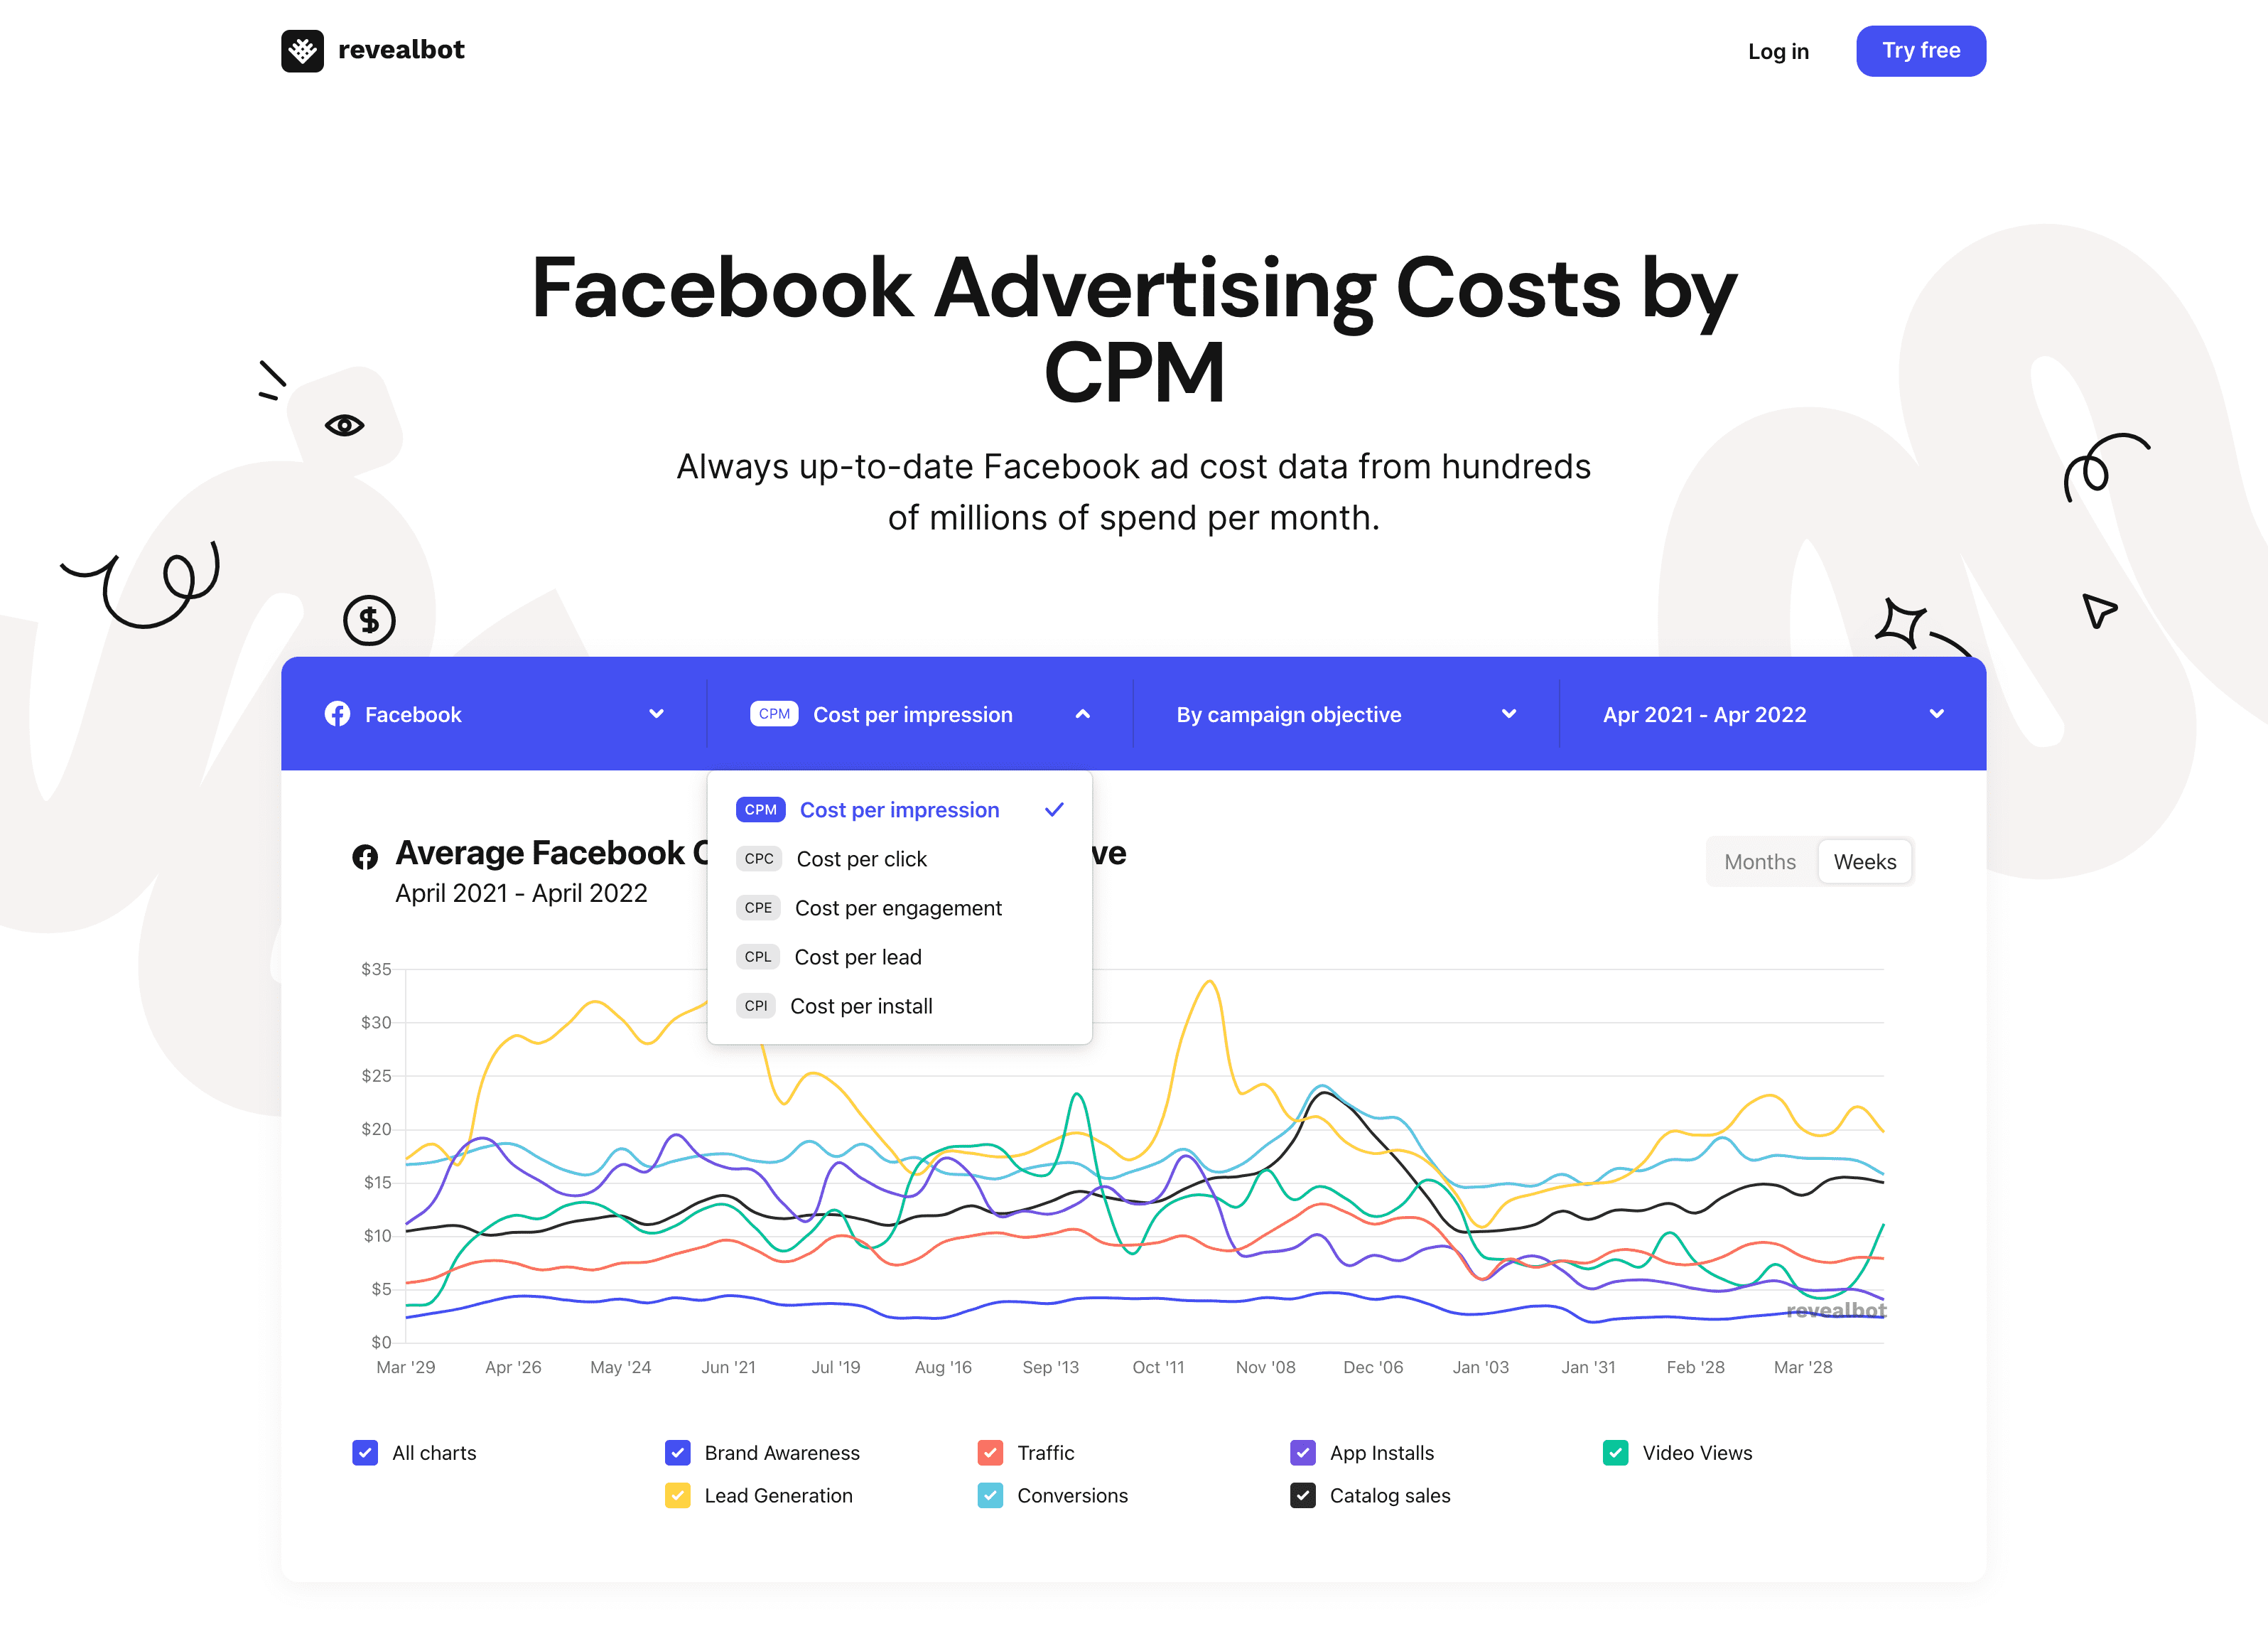 Completed form of Revealbot's Facebook ad cost tool